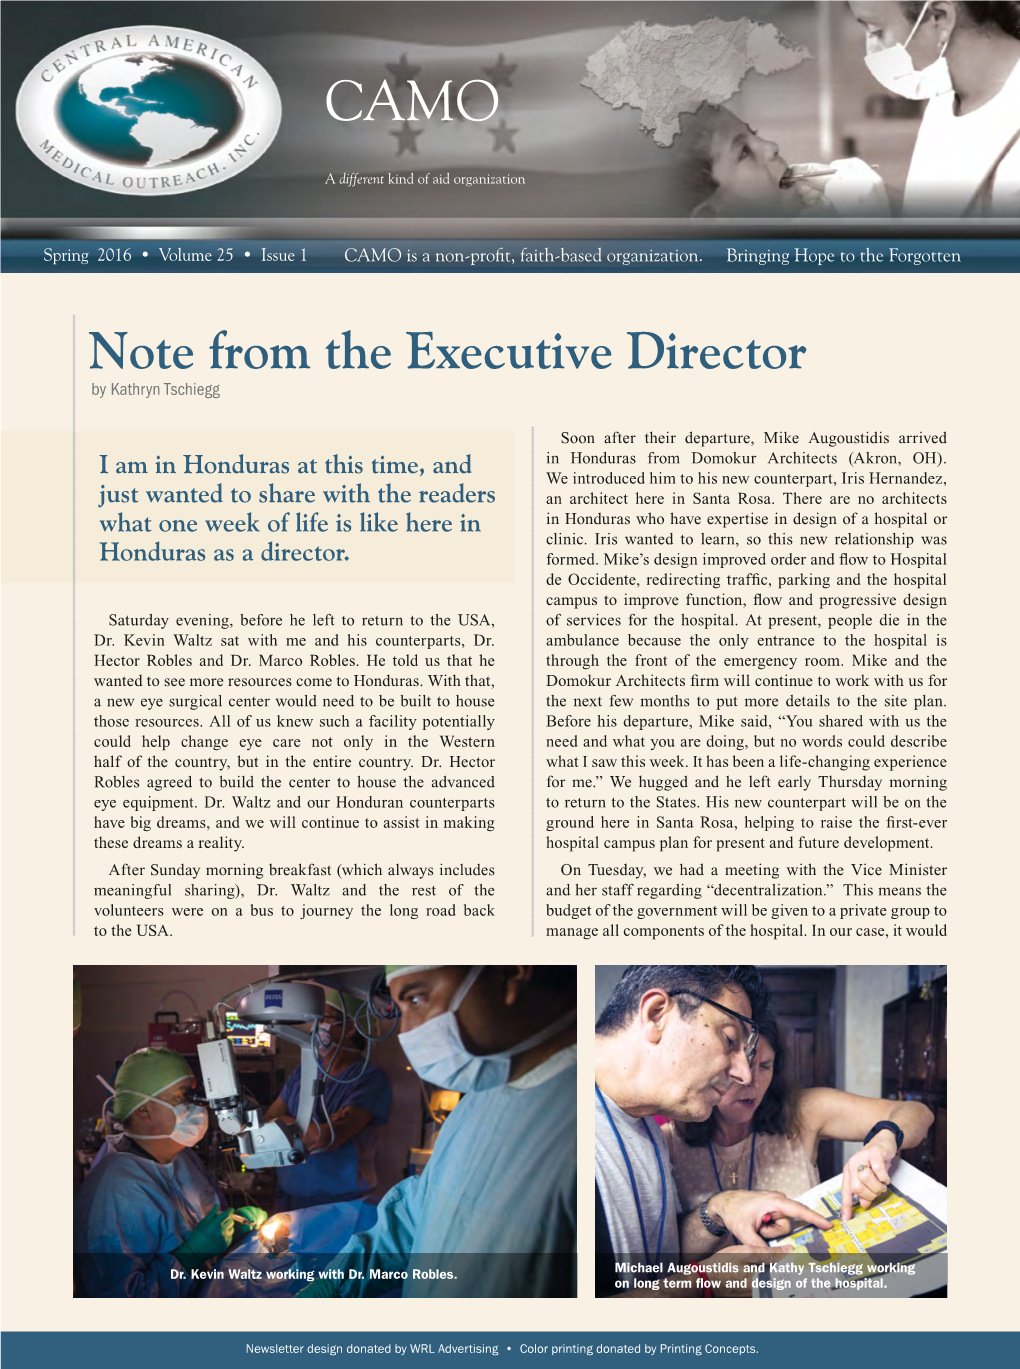 Note from the Executive Director by Kathryn Tschiegg